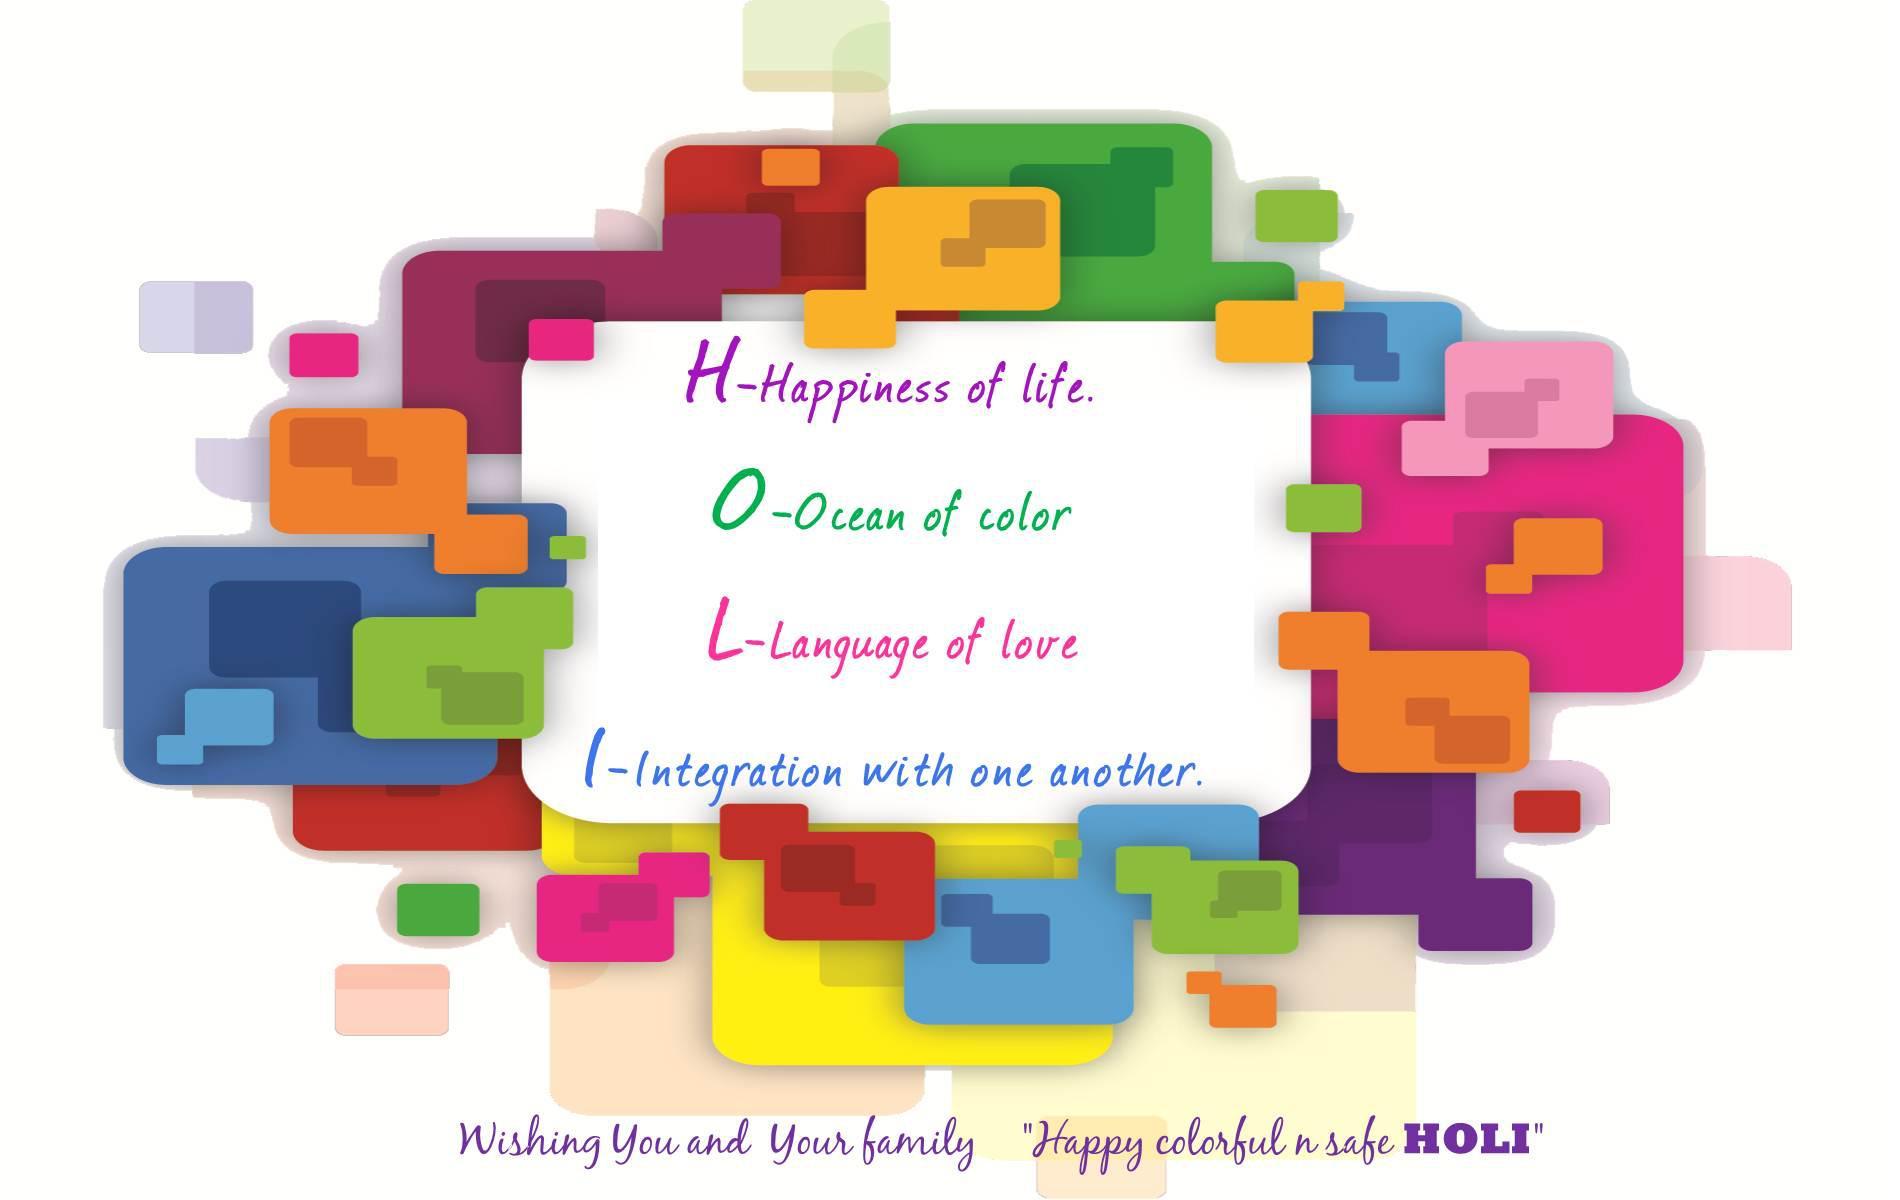 Holi Wishes Wallpaper, image collections of wallpaper